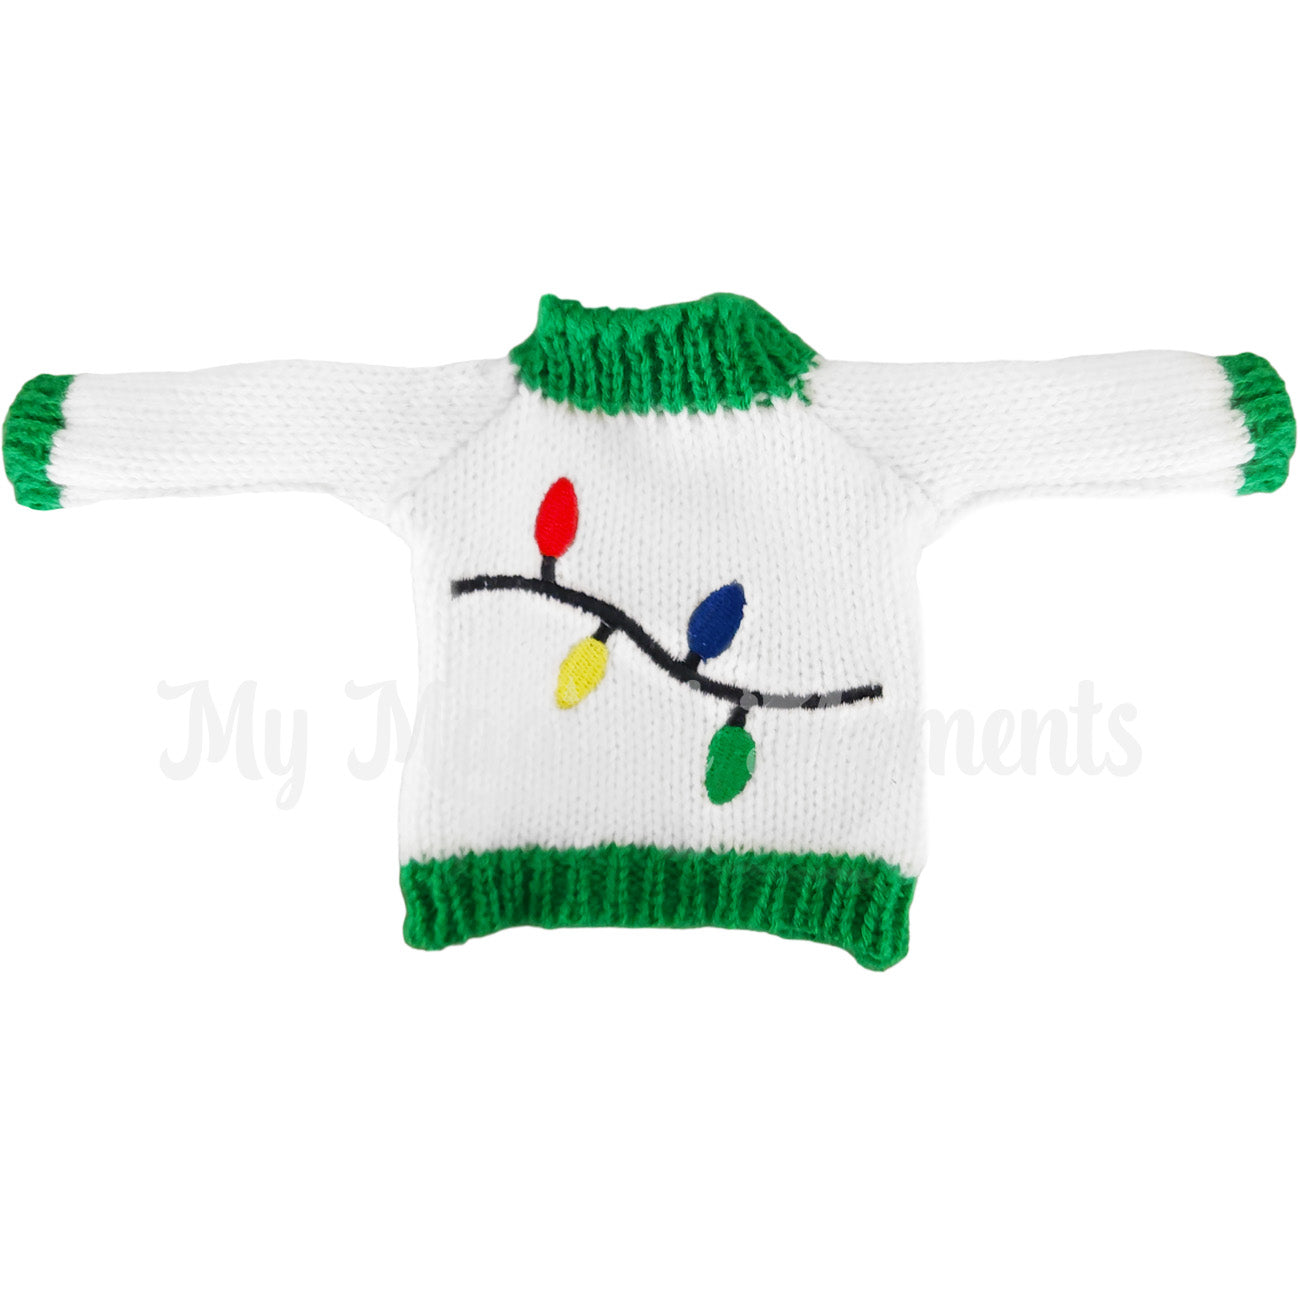 White and green elf ugly sweater with knitted lights